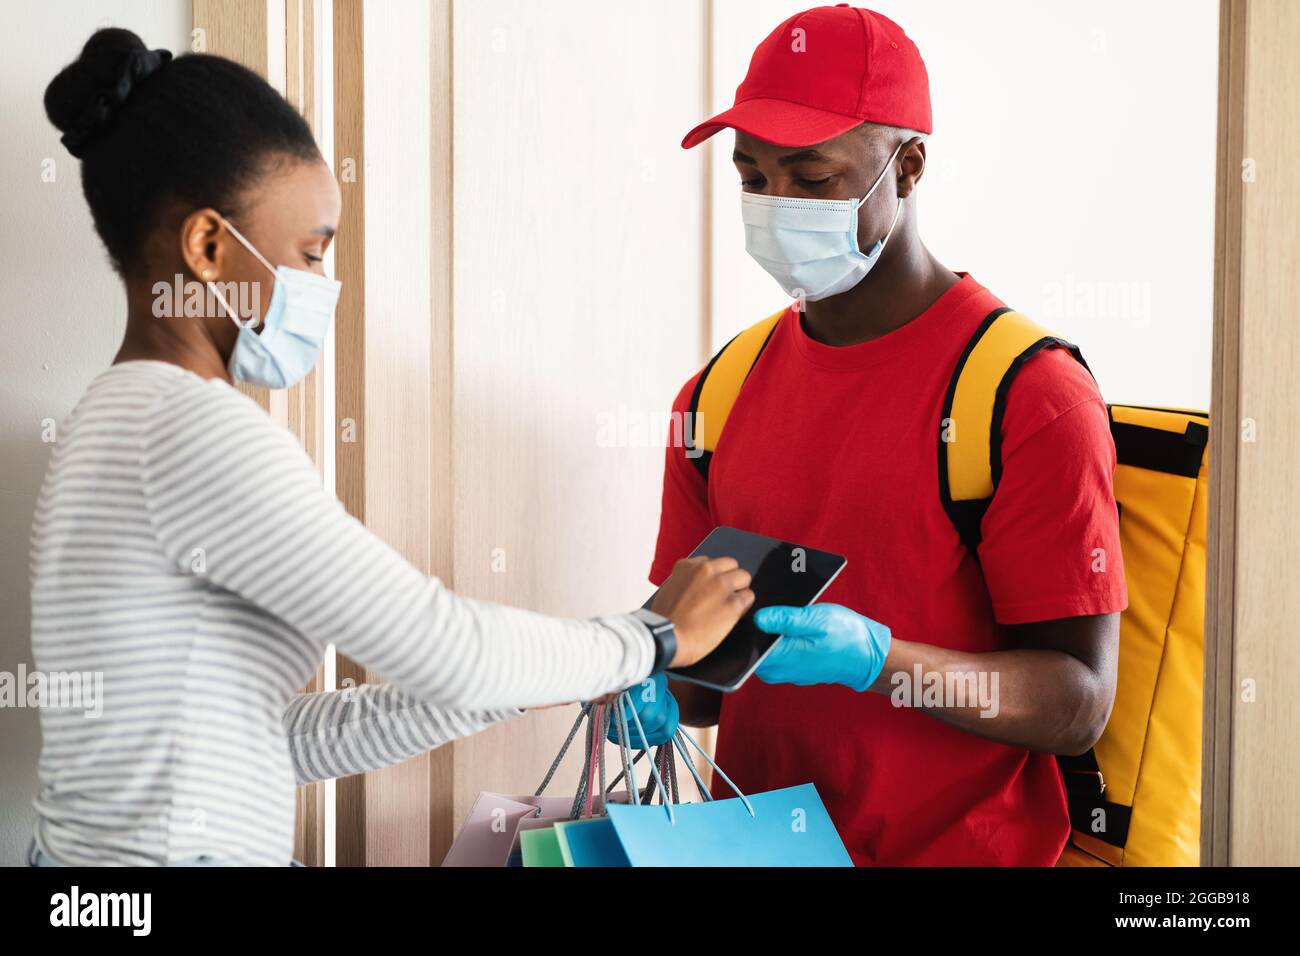 Lady Receiving Bags From Courier Scanning Fingerprint On Tablet Indoor Stock Photo